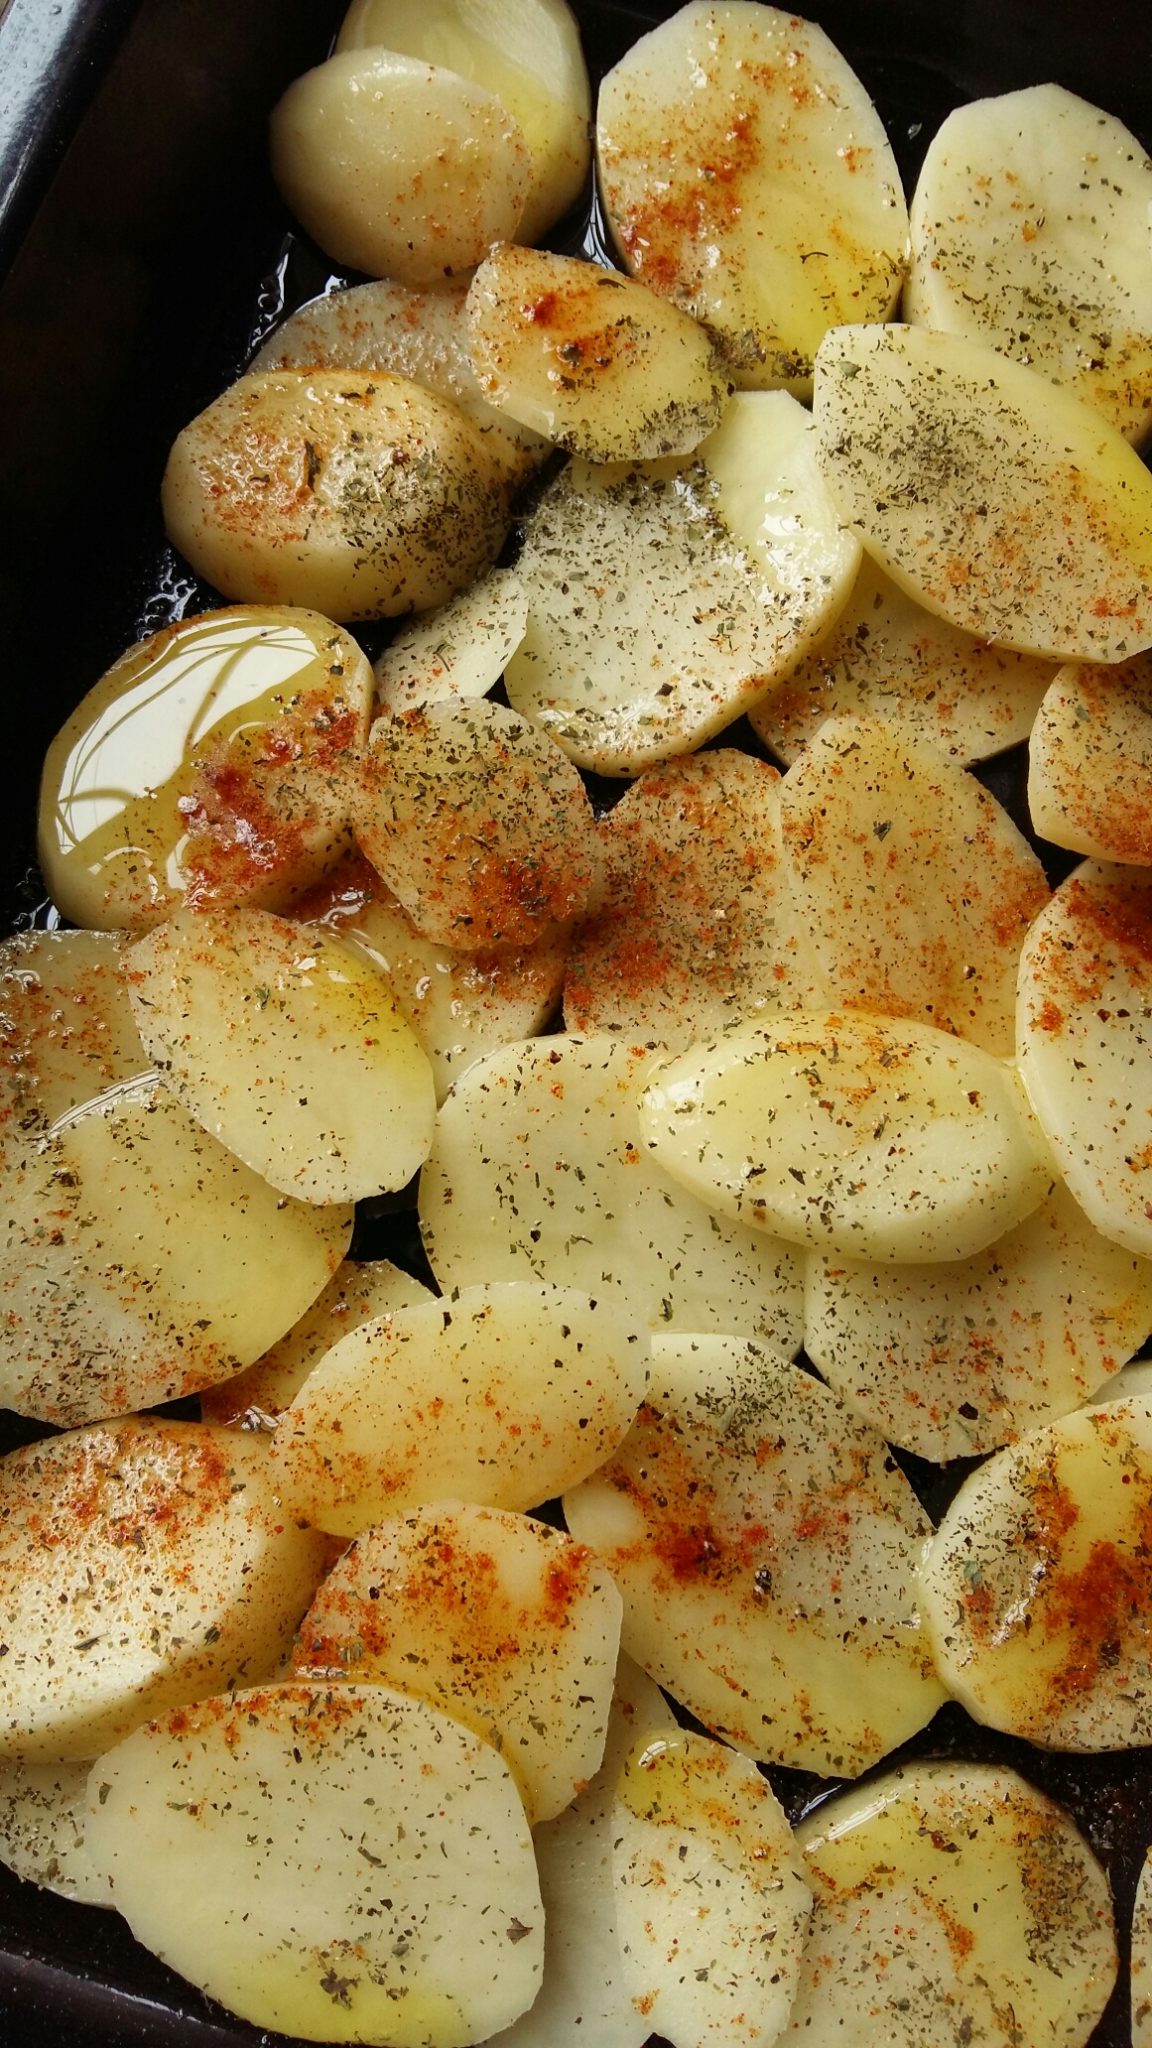 First layer: sliced potatoes seasoned with smoked paprika, dried mint, generous amounts of olive oil, salt and pepper